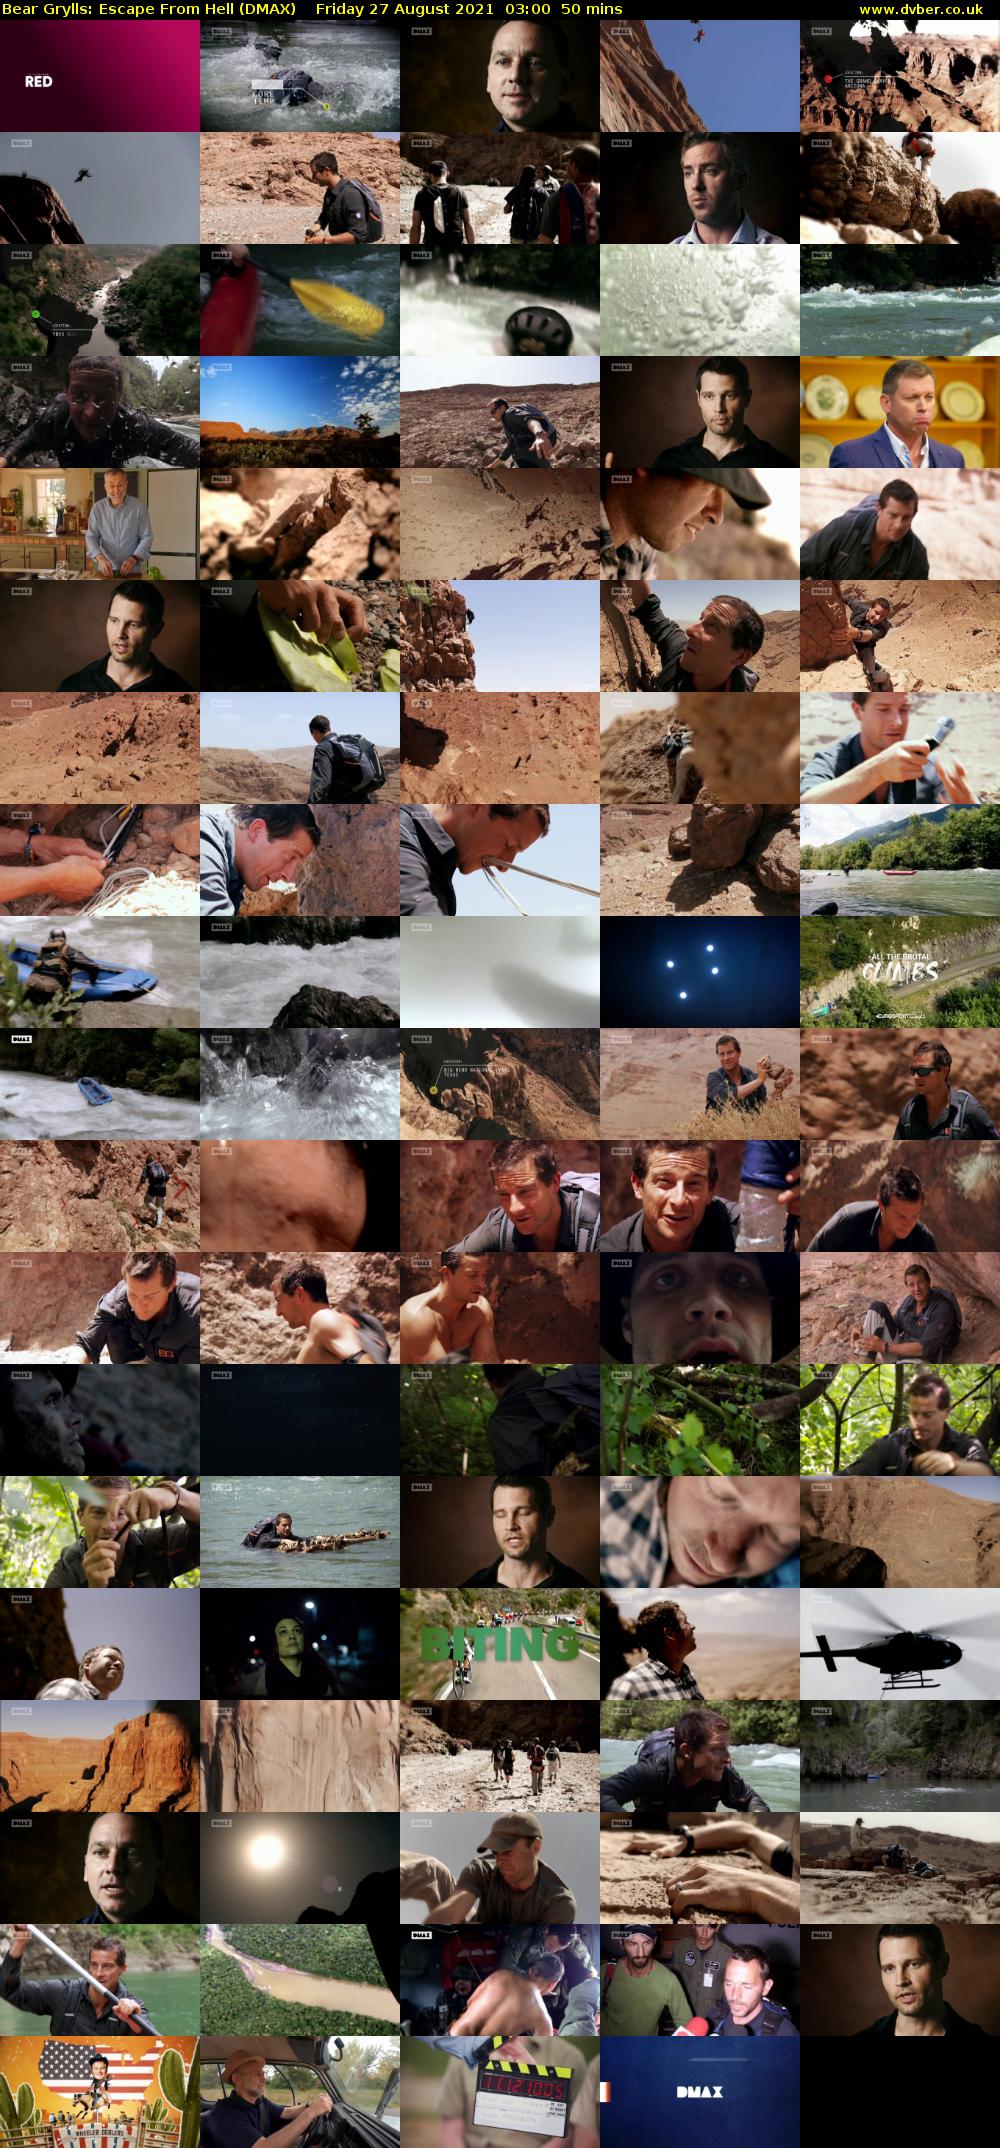 Bear Grylls: Escape From Hell (DMAX) Friday 27 August 2021 03:00 - 03:50